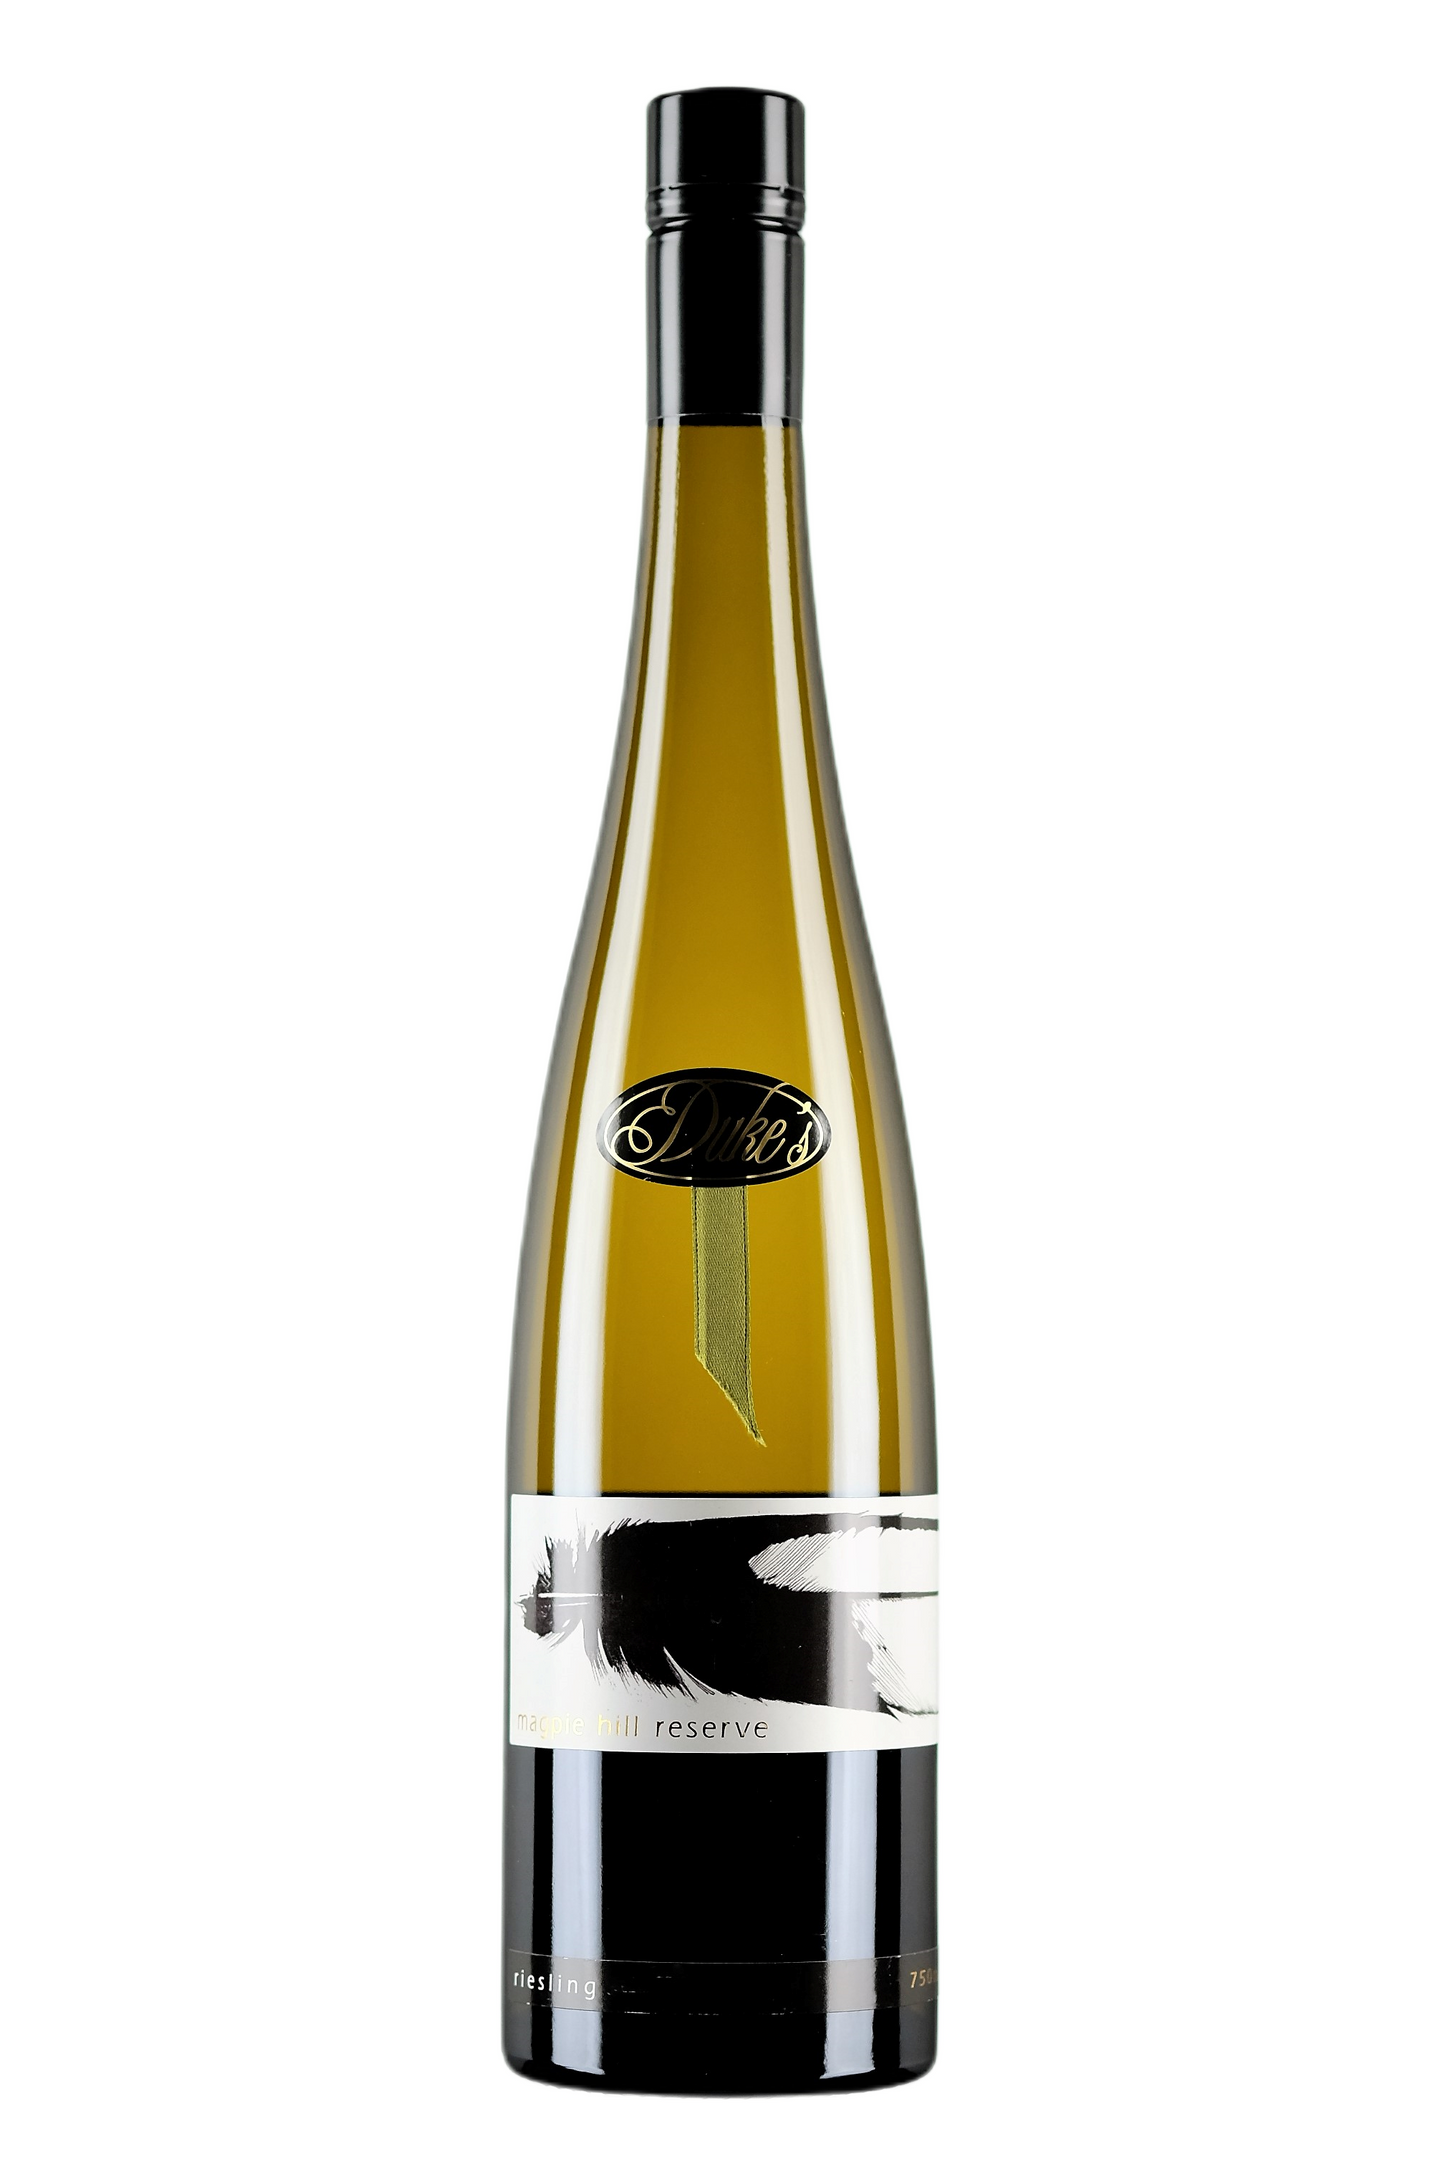 Dukes Vineyard Magpie Hill Reserve Riesling